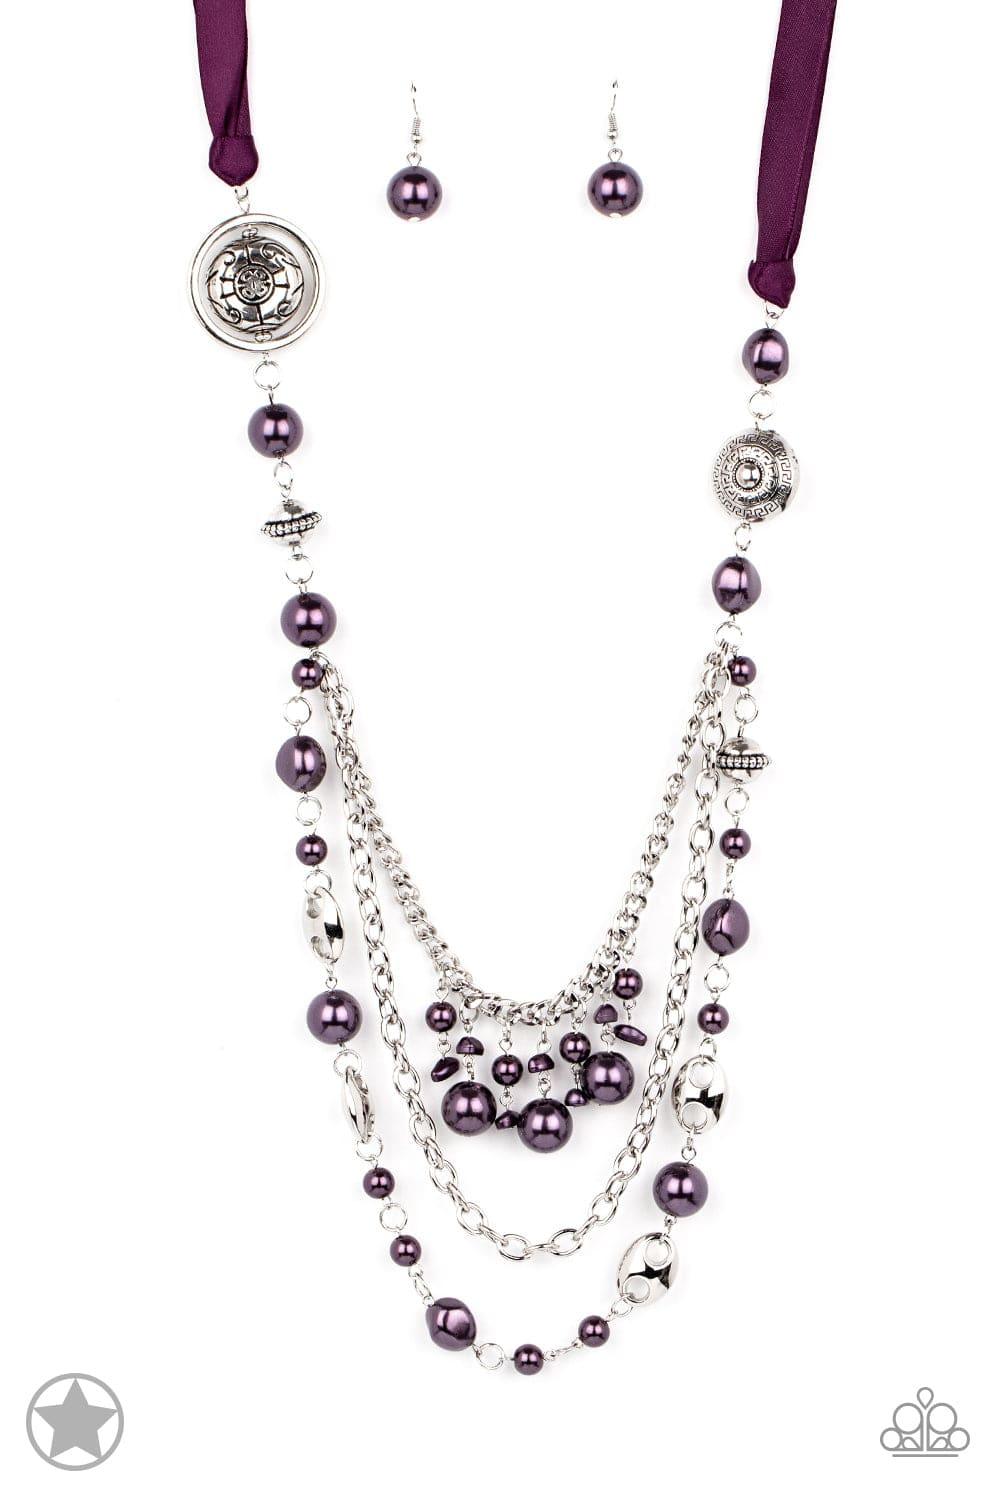 Paparazzi Accessories - Paparazzi Blockbuster Necklace: All The Trimmings Purple - Bling by JessieK